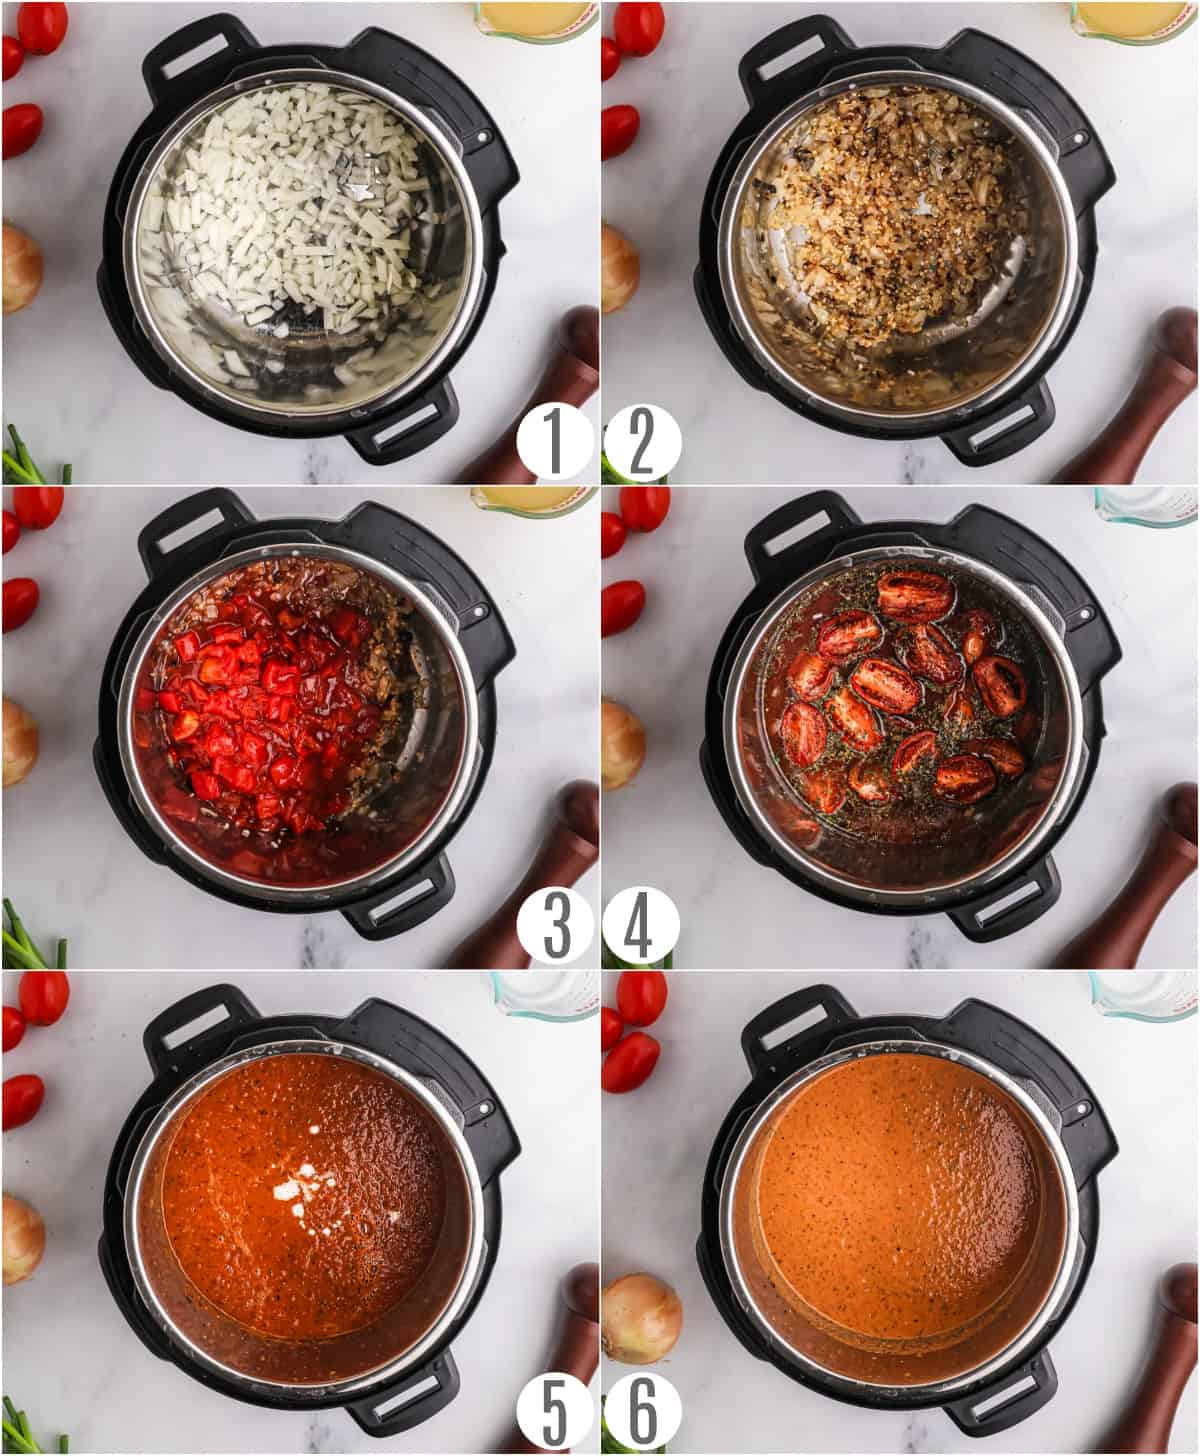 Step by step instructions showing how to make roasted tomato soup in the pressure cooker.